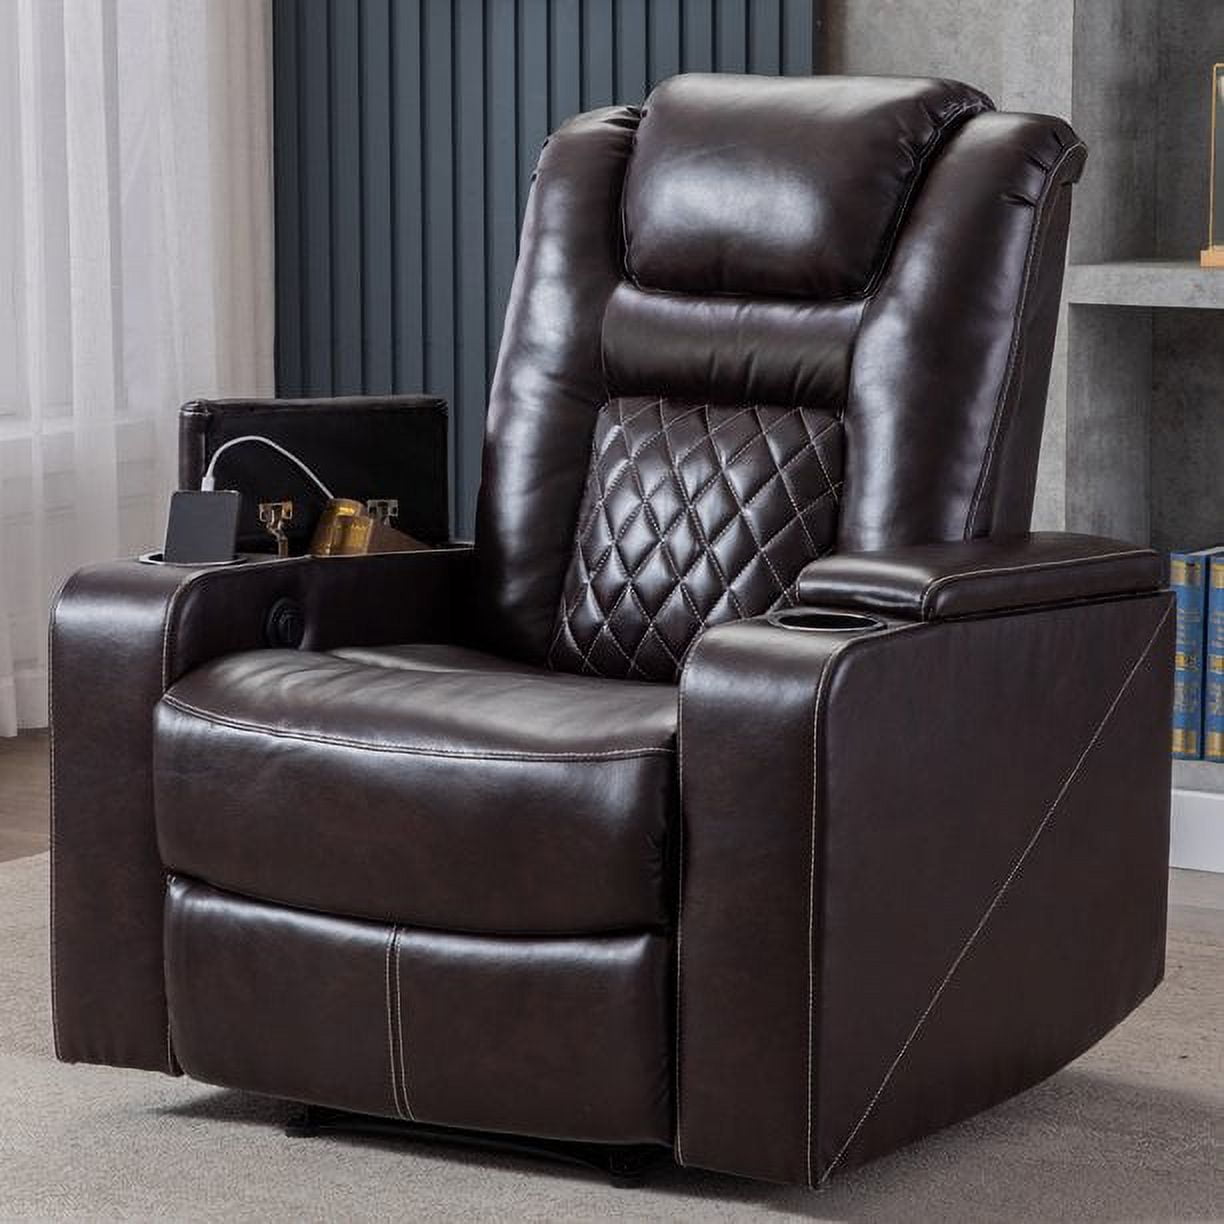 Canmov Electric Power Recliner Chair with Cup Holder, Faux Leather Home ...